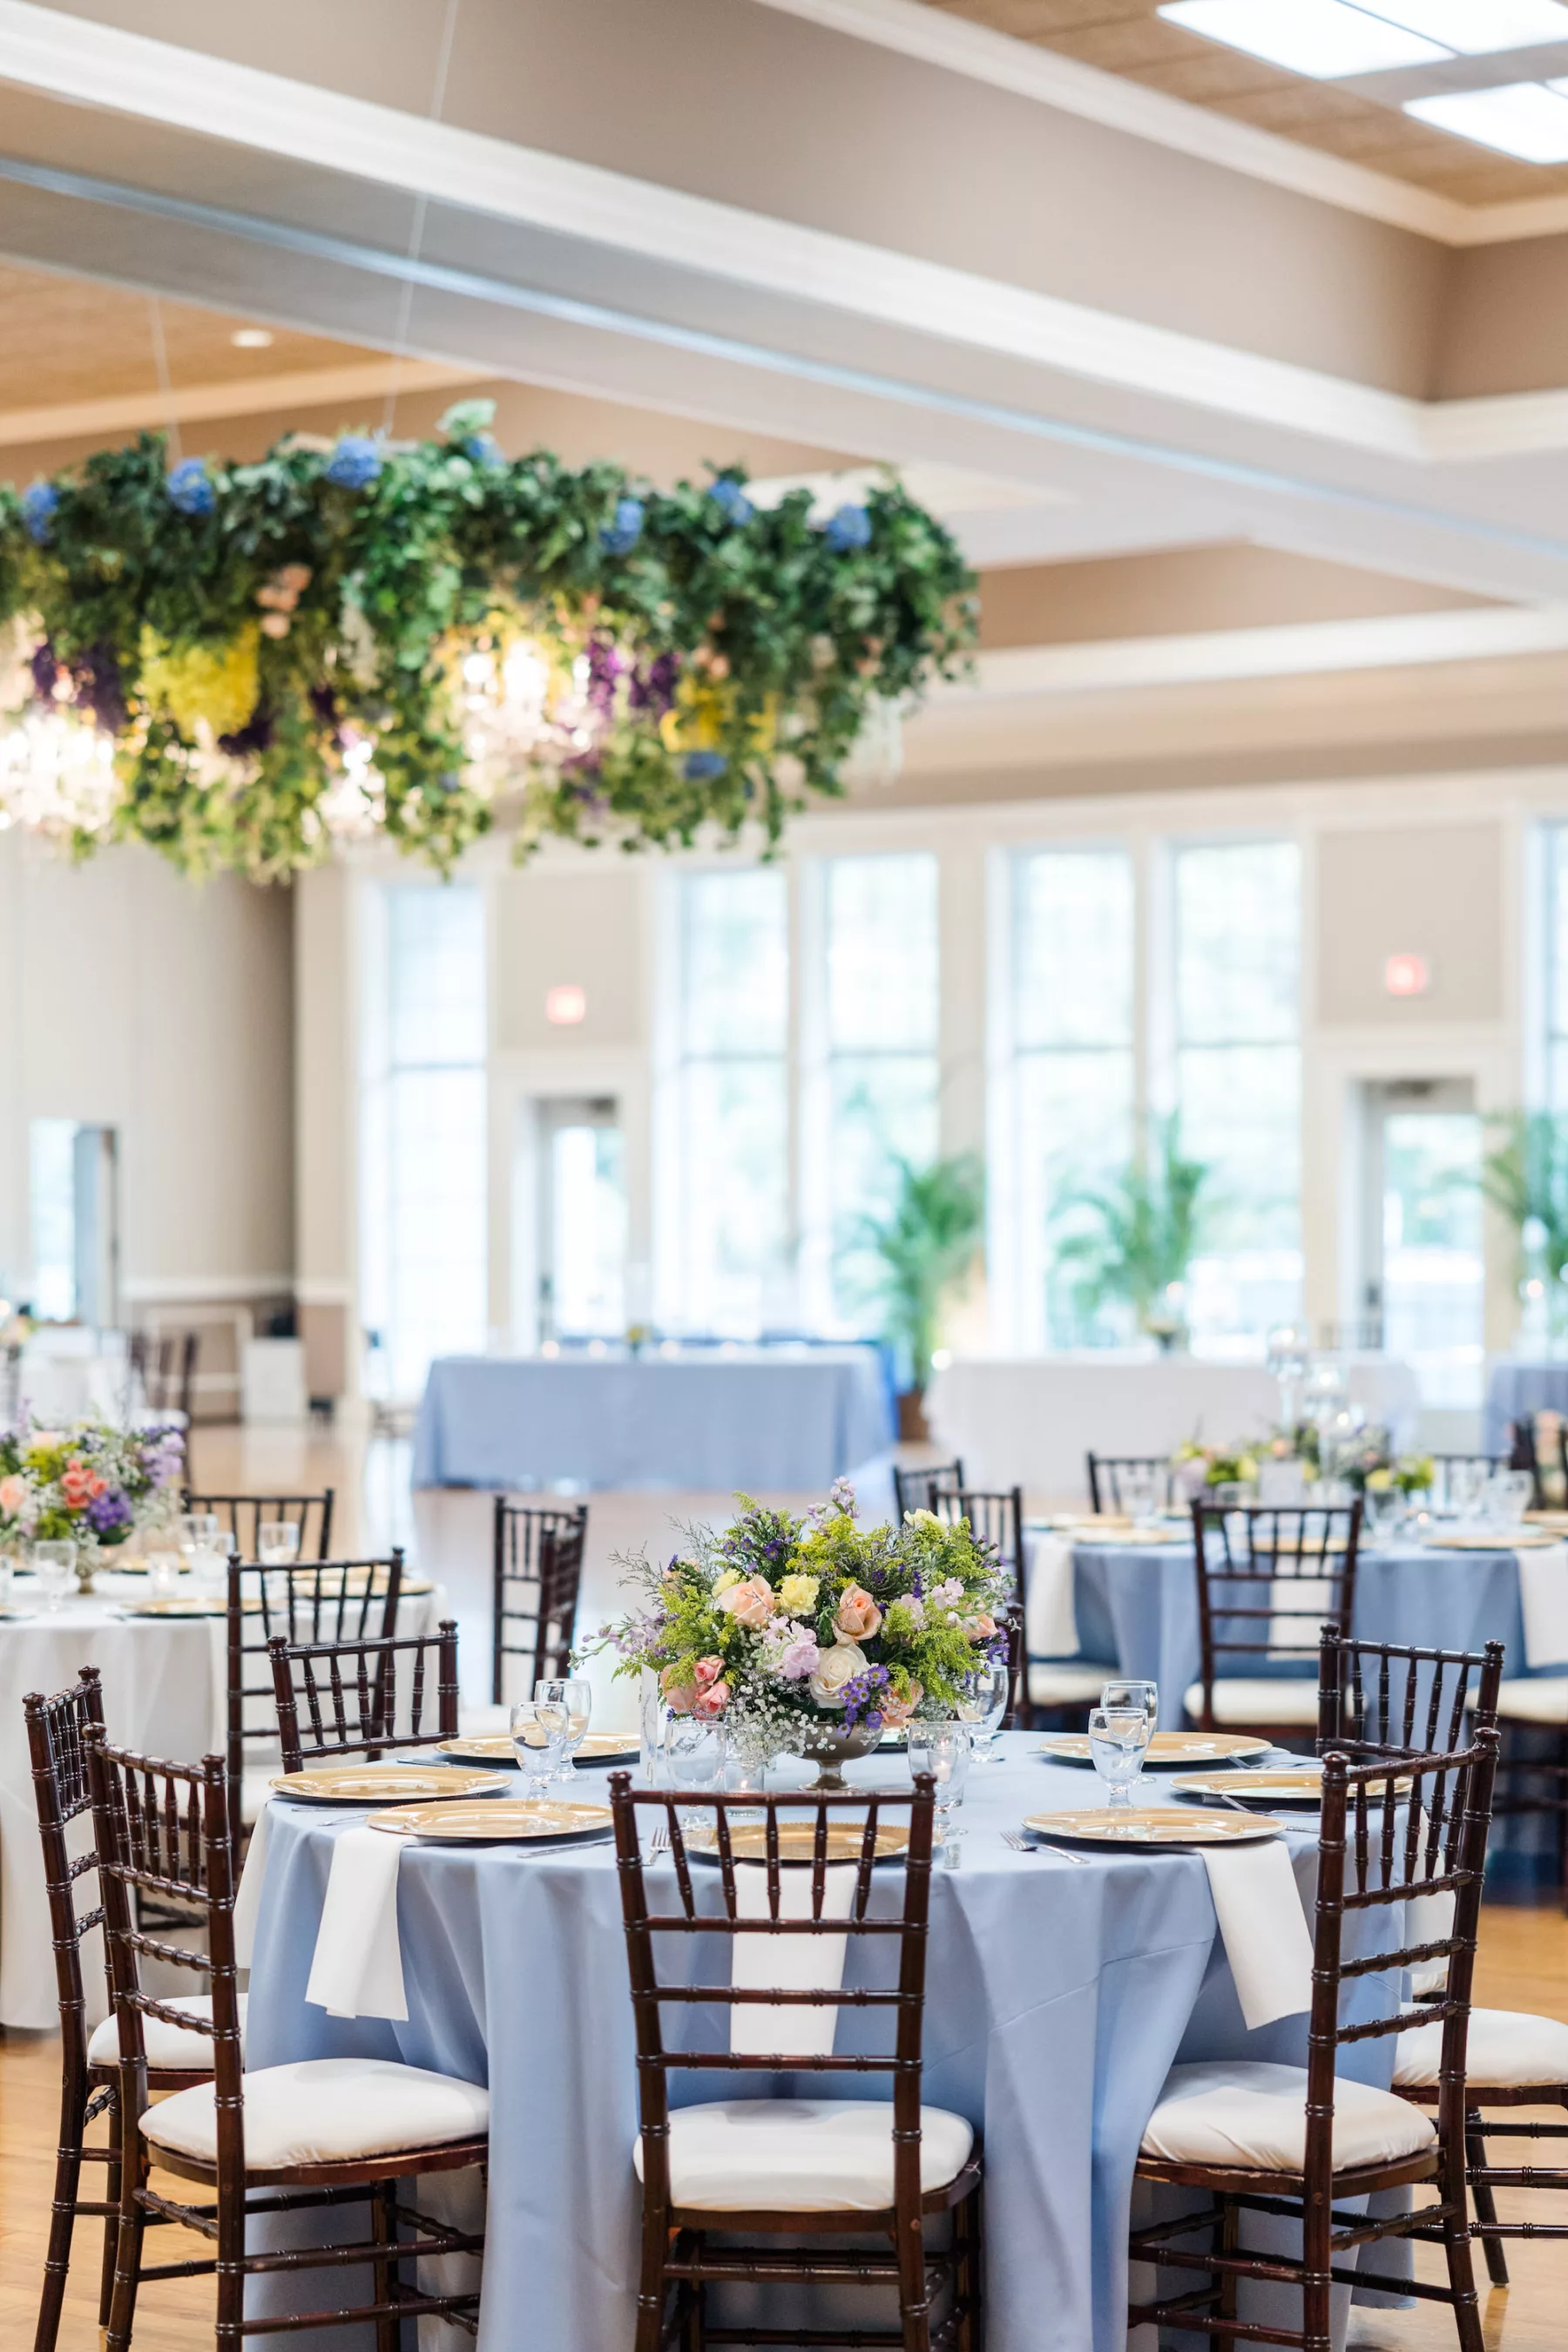 Blue and Peach Spring English Garden Inspired Ballroom Wedding Reception with Mahogany Chiavari Chairs Ideas and Floral Chandelier